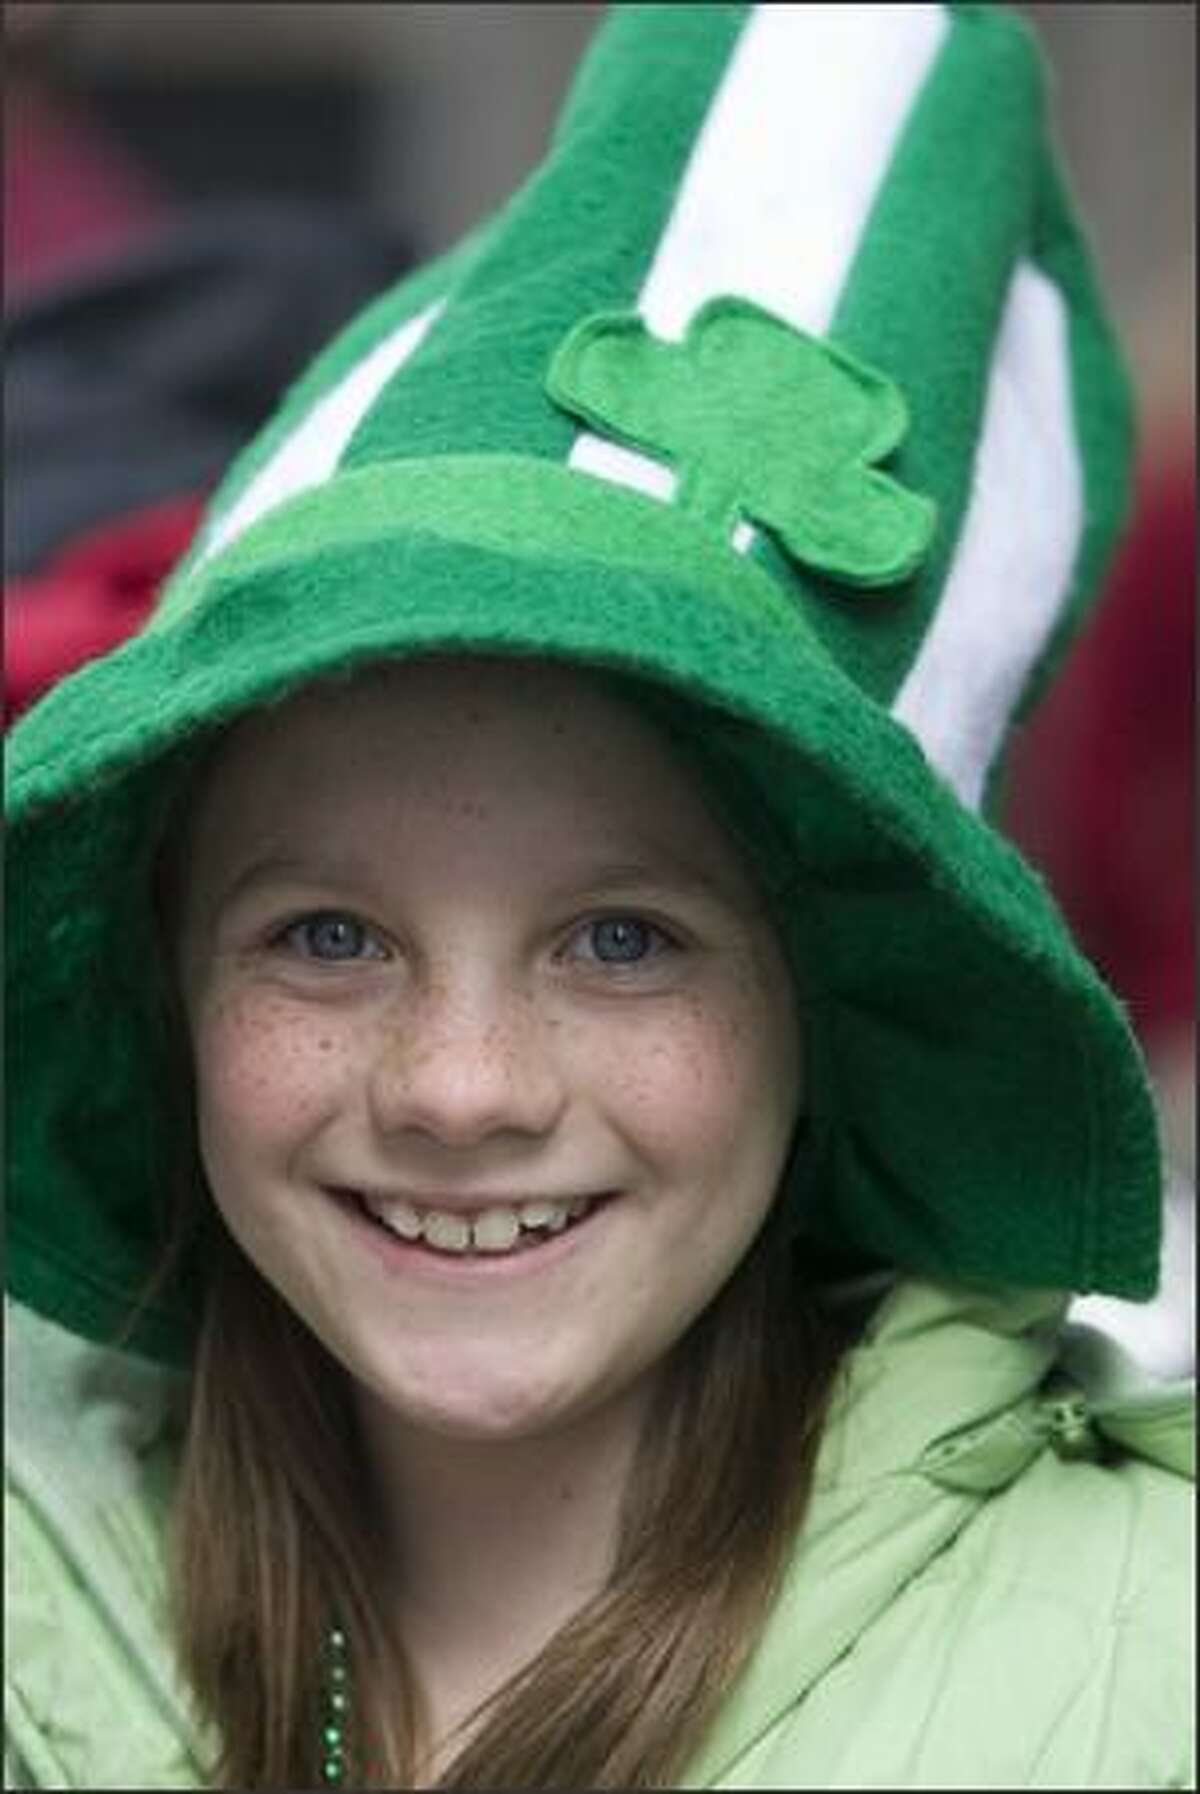 Elizabeth Nelson shows her Irish colors while watching the 37th annual St. Patrick's Day Parade Saturday in Seattle.